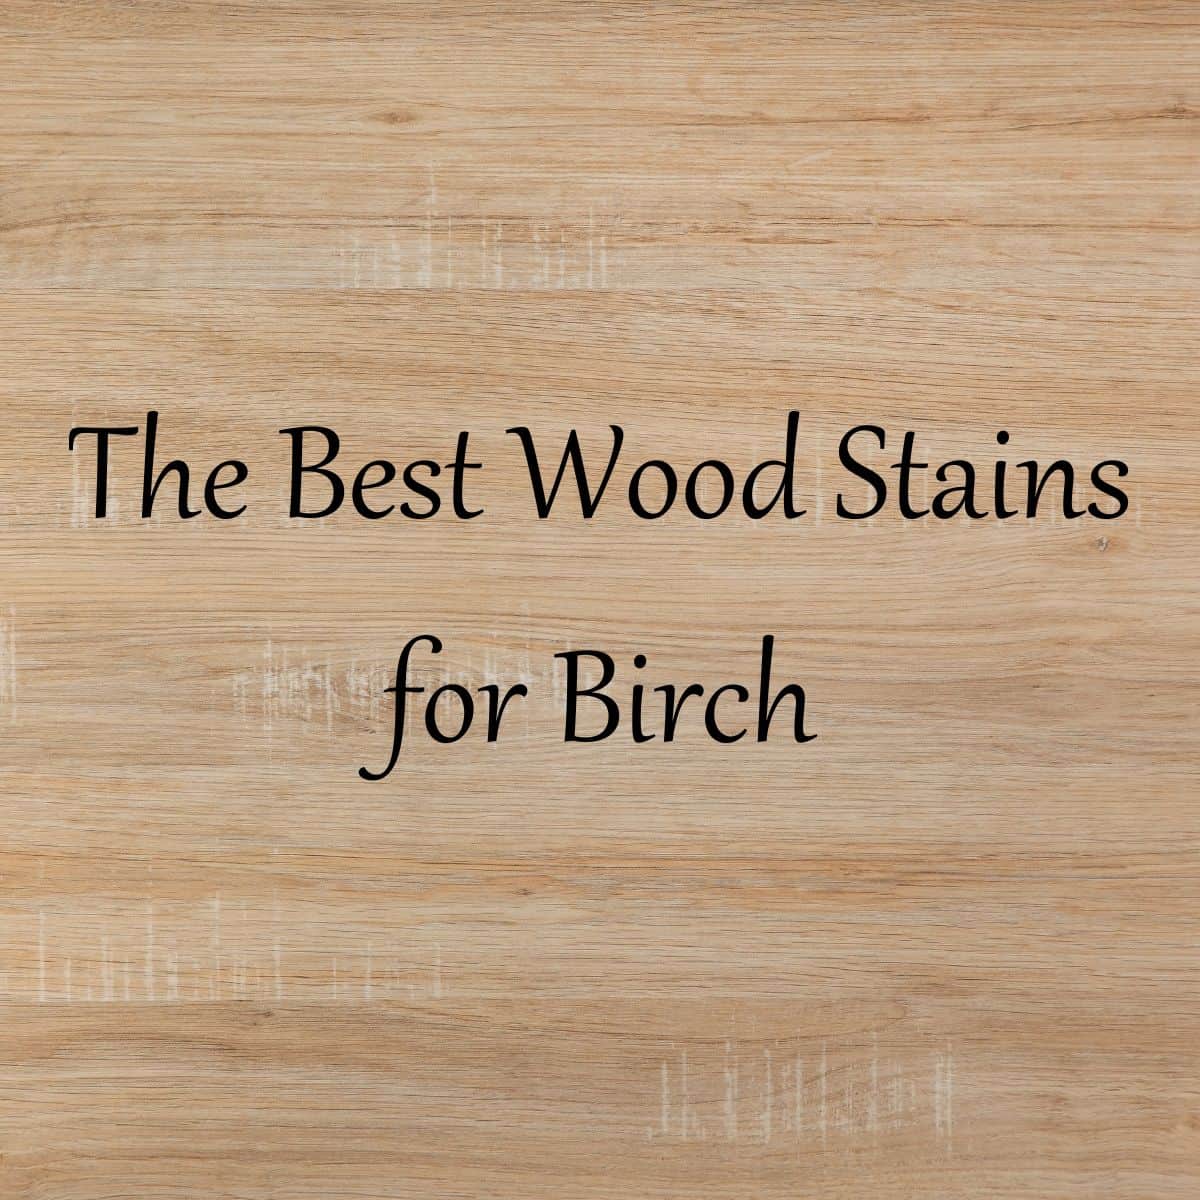 Birch plywood with text overlay.